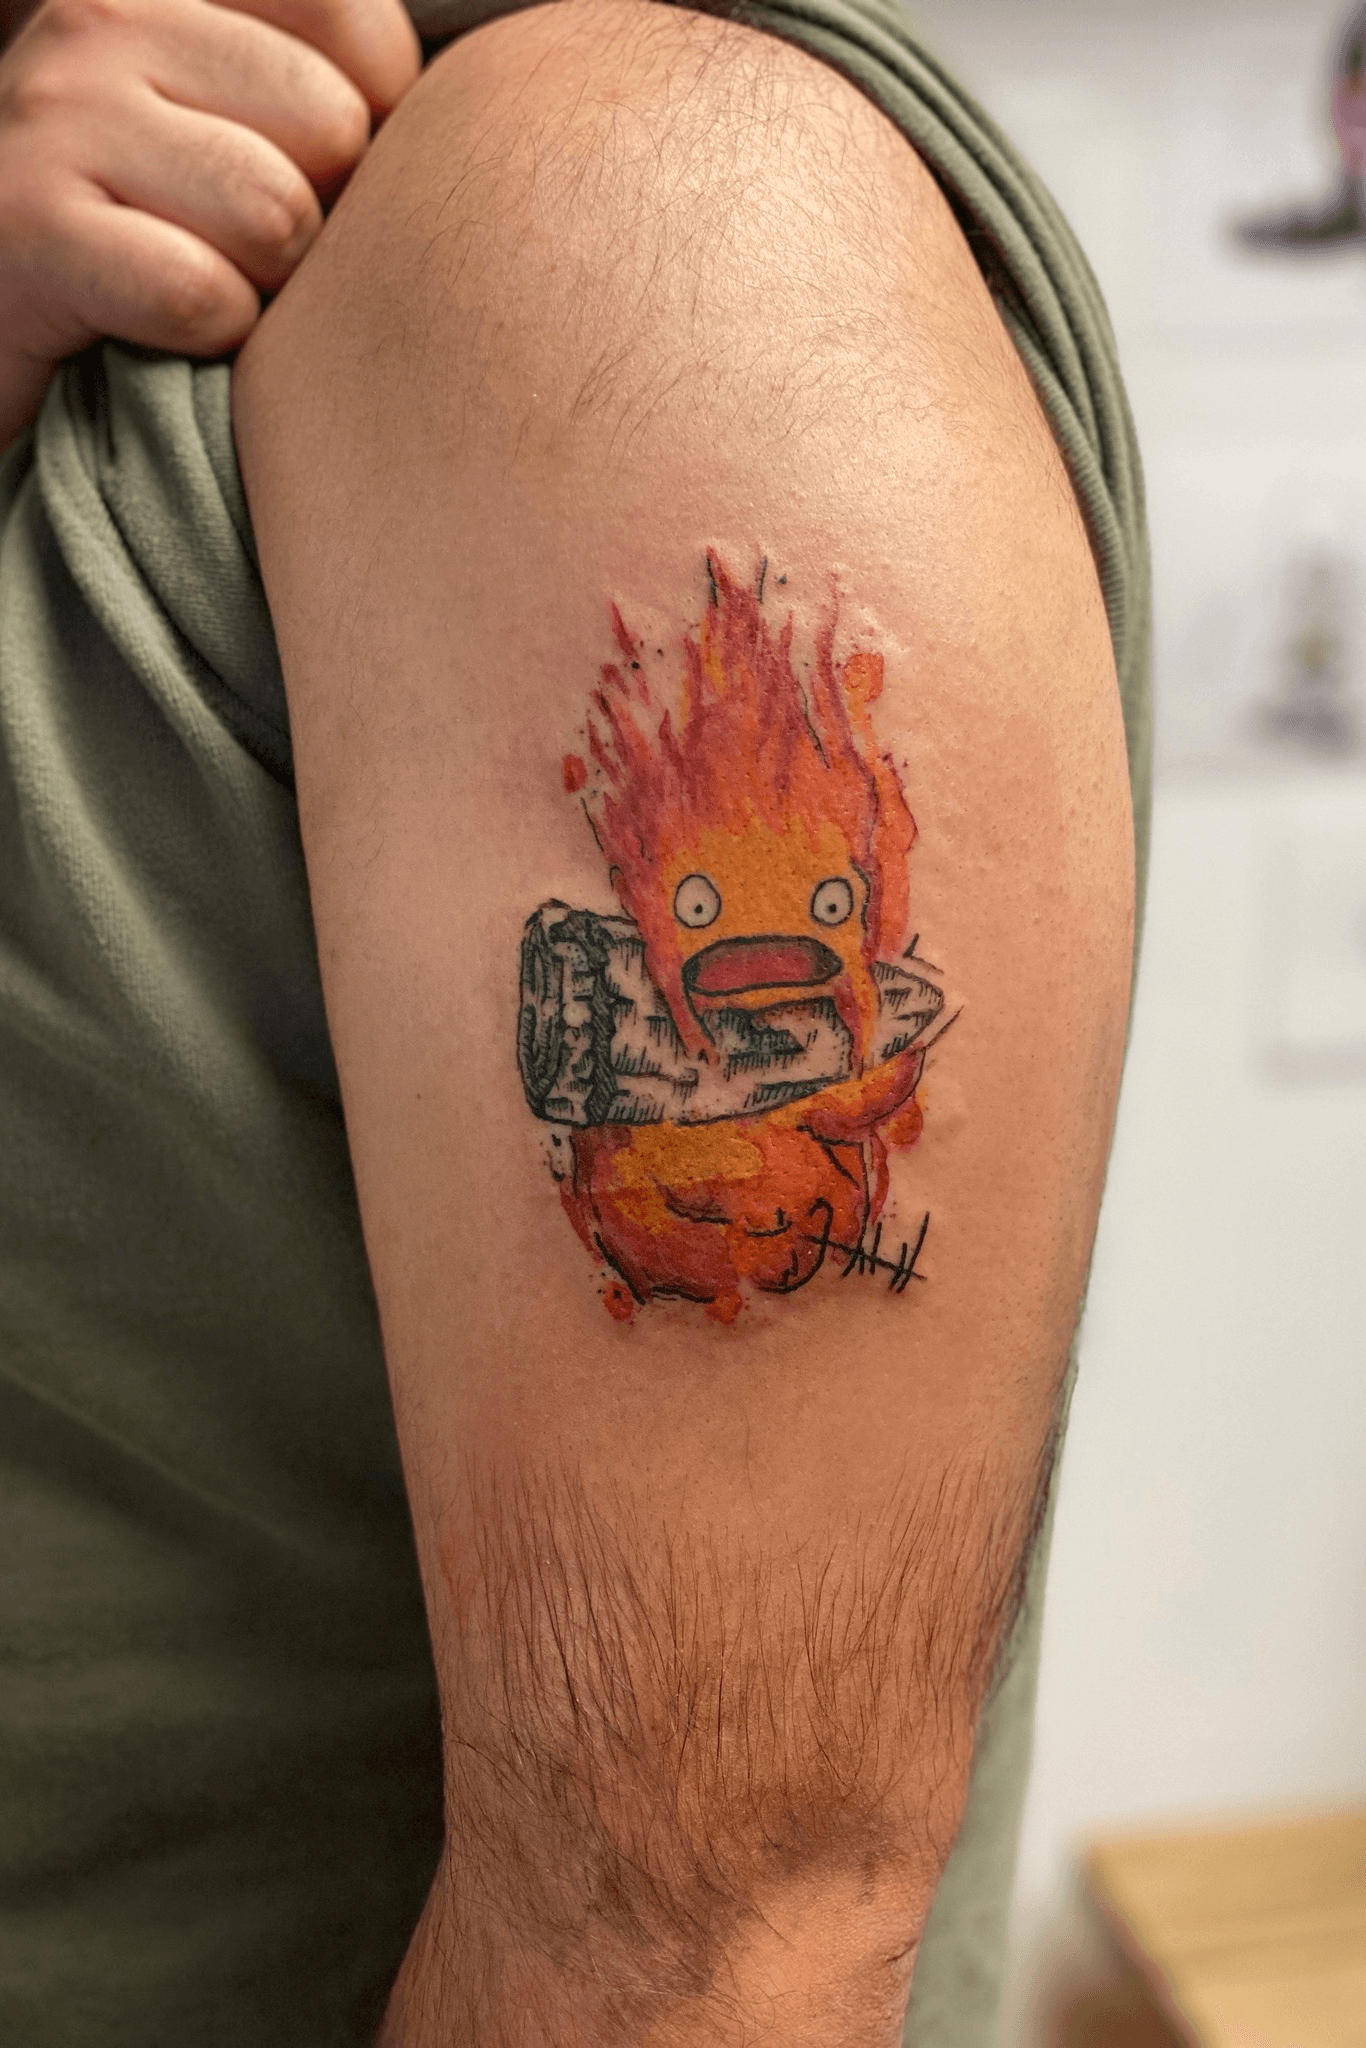 Howls Moving Castle tattoo located on the tricep